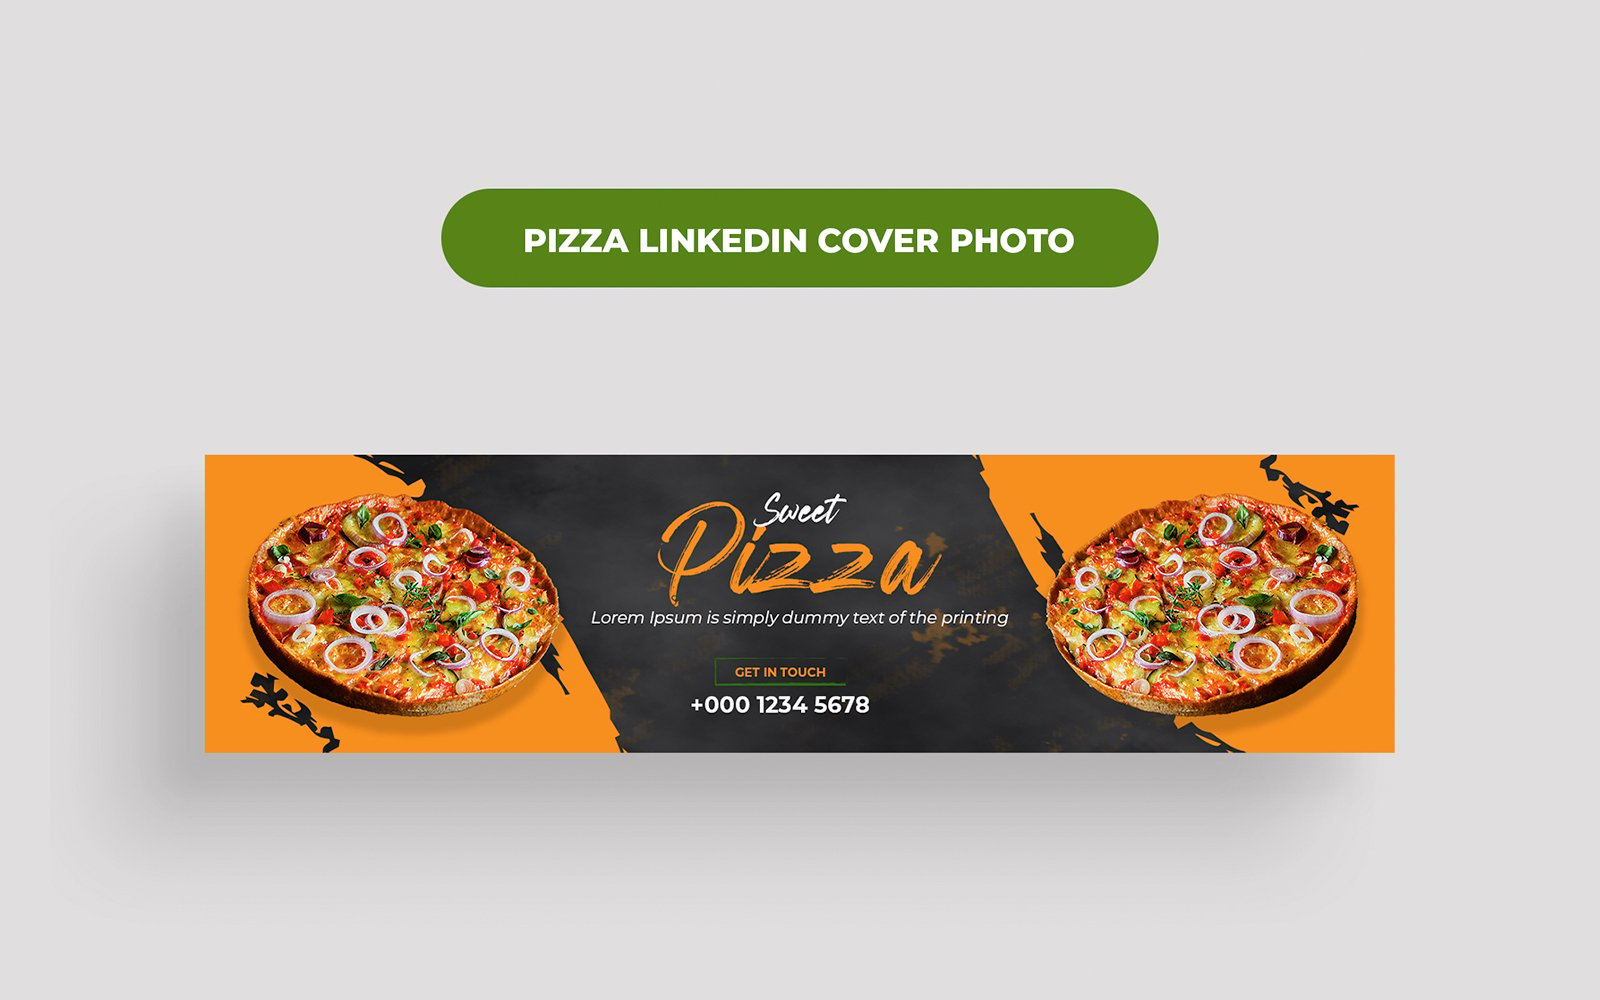 Pizza Food LinkedIn Cover Photo Template